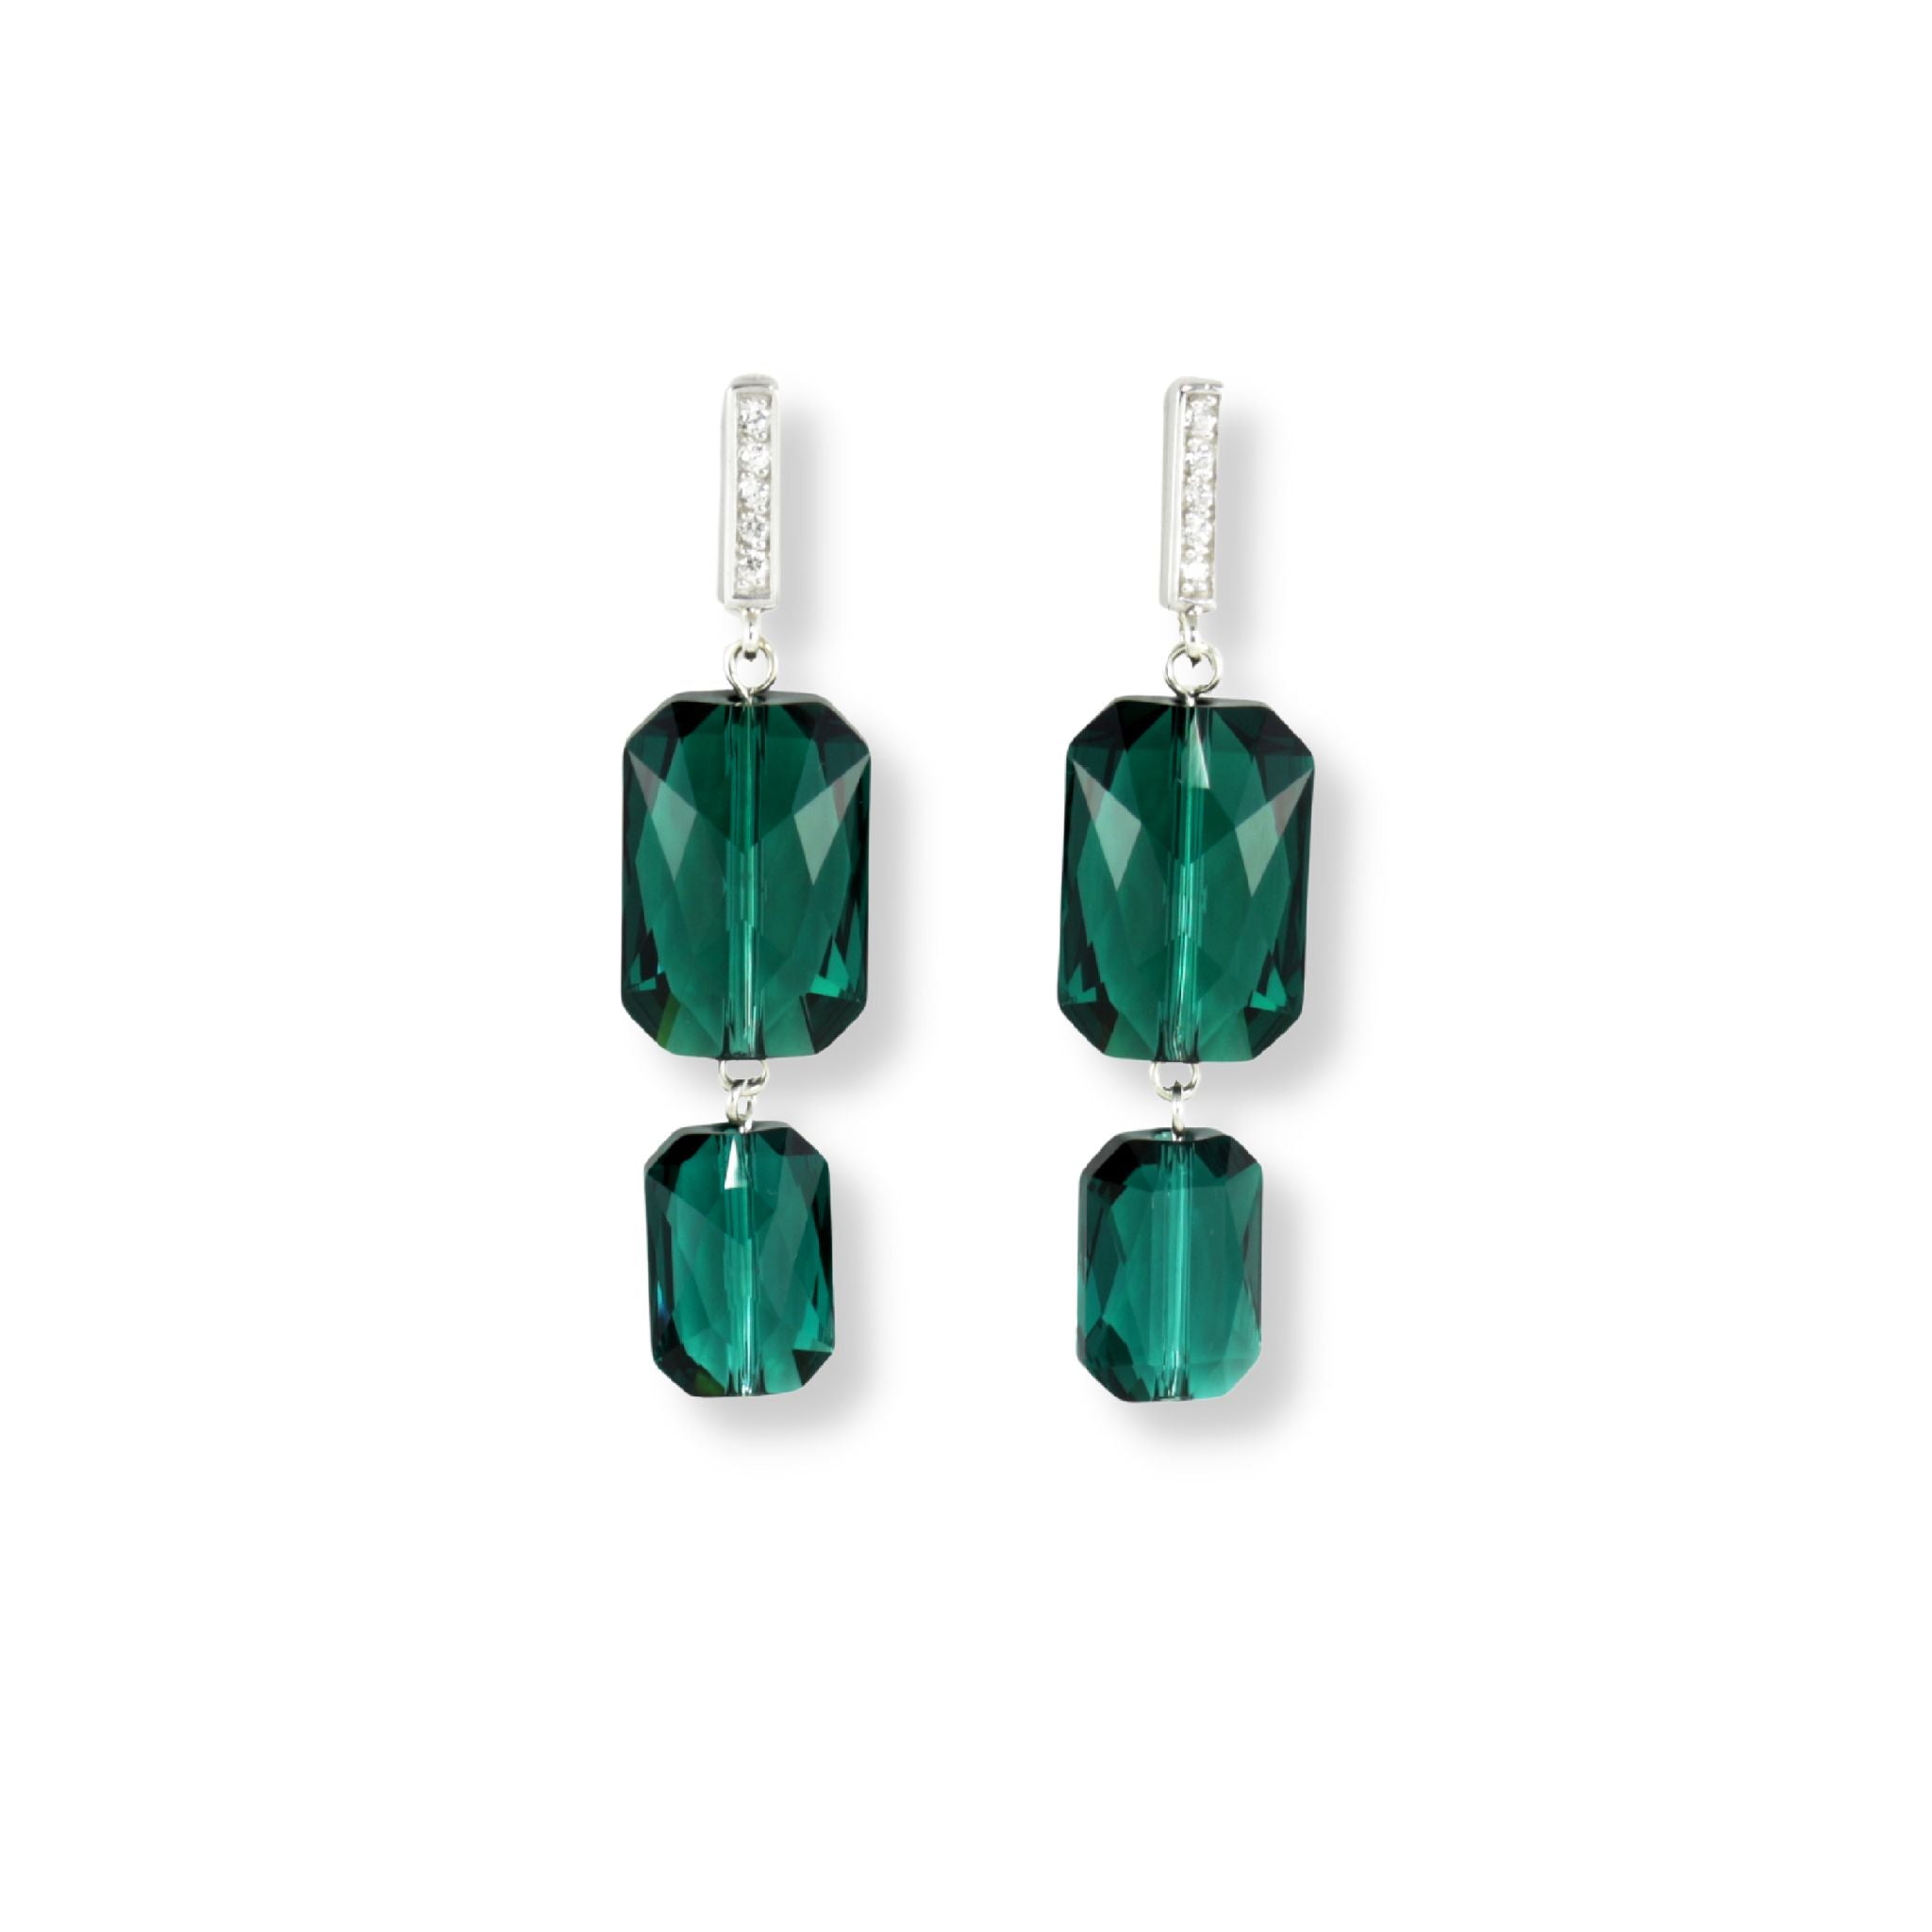 Emerald cut Swarovski crystal pendant earrings in a rich emerald green color, displayed on a cubic zirconia and sterling silver rectangle ear stud